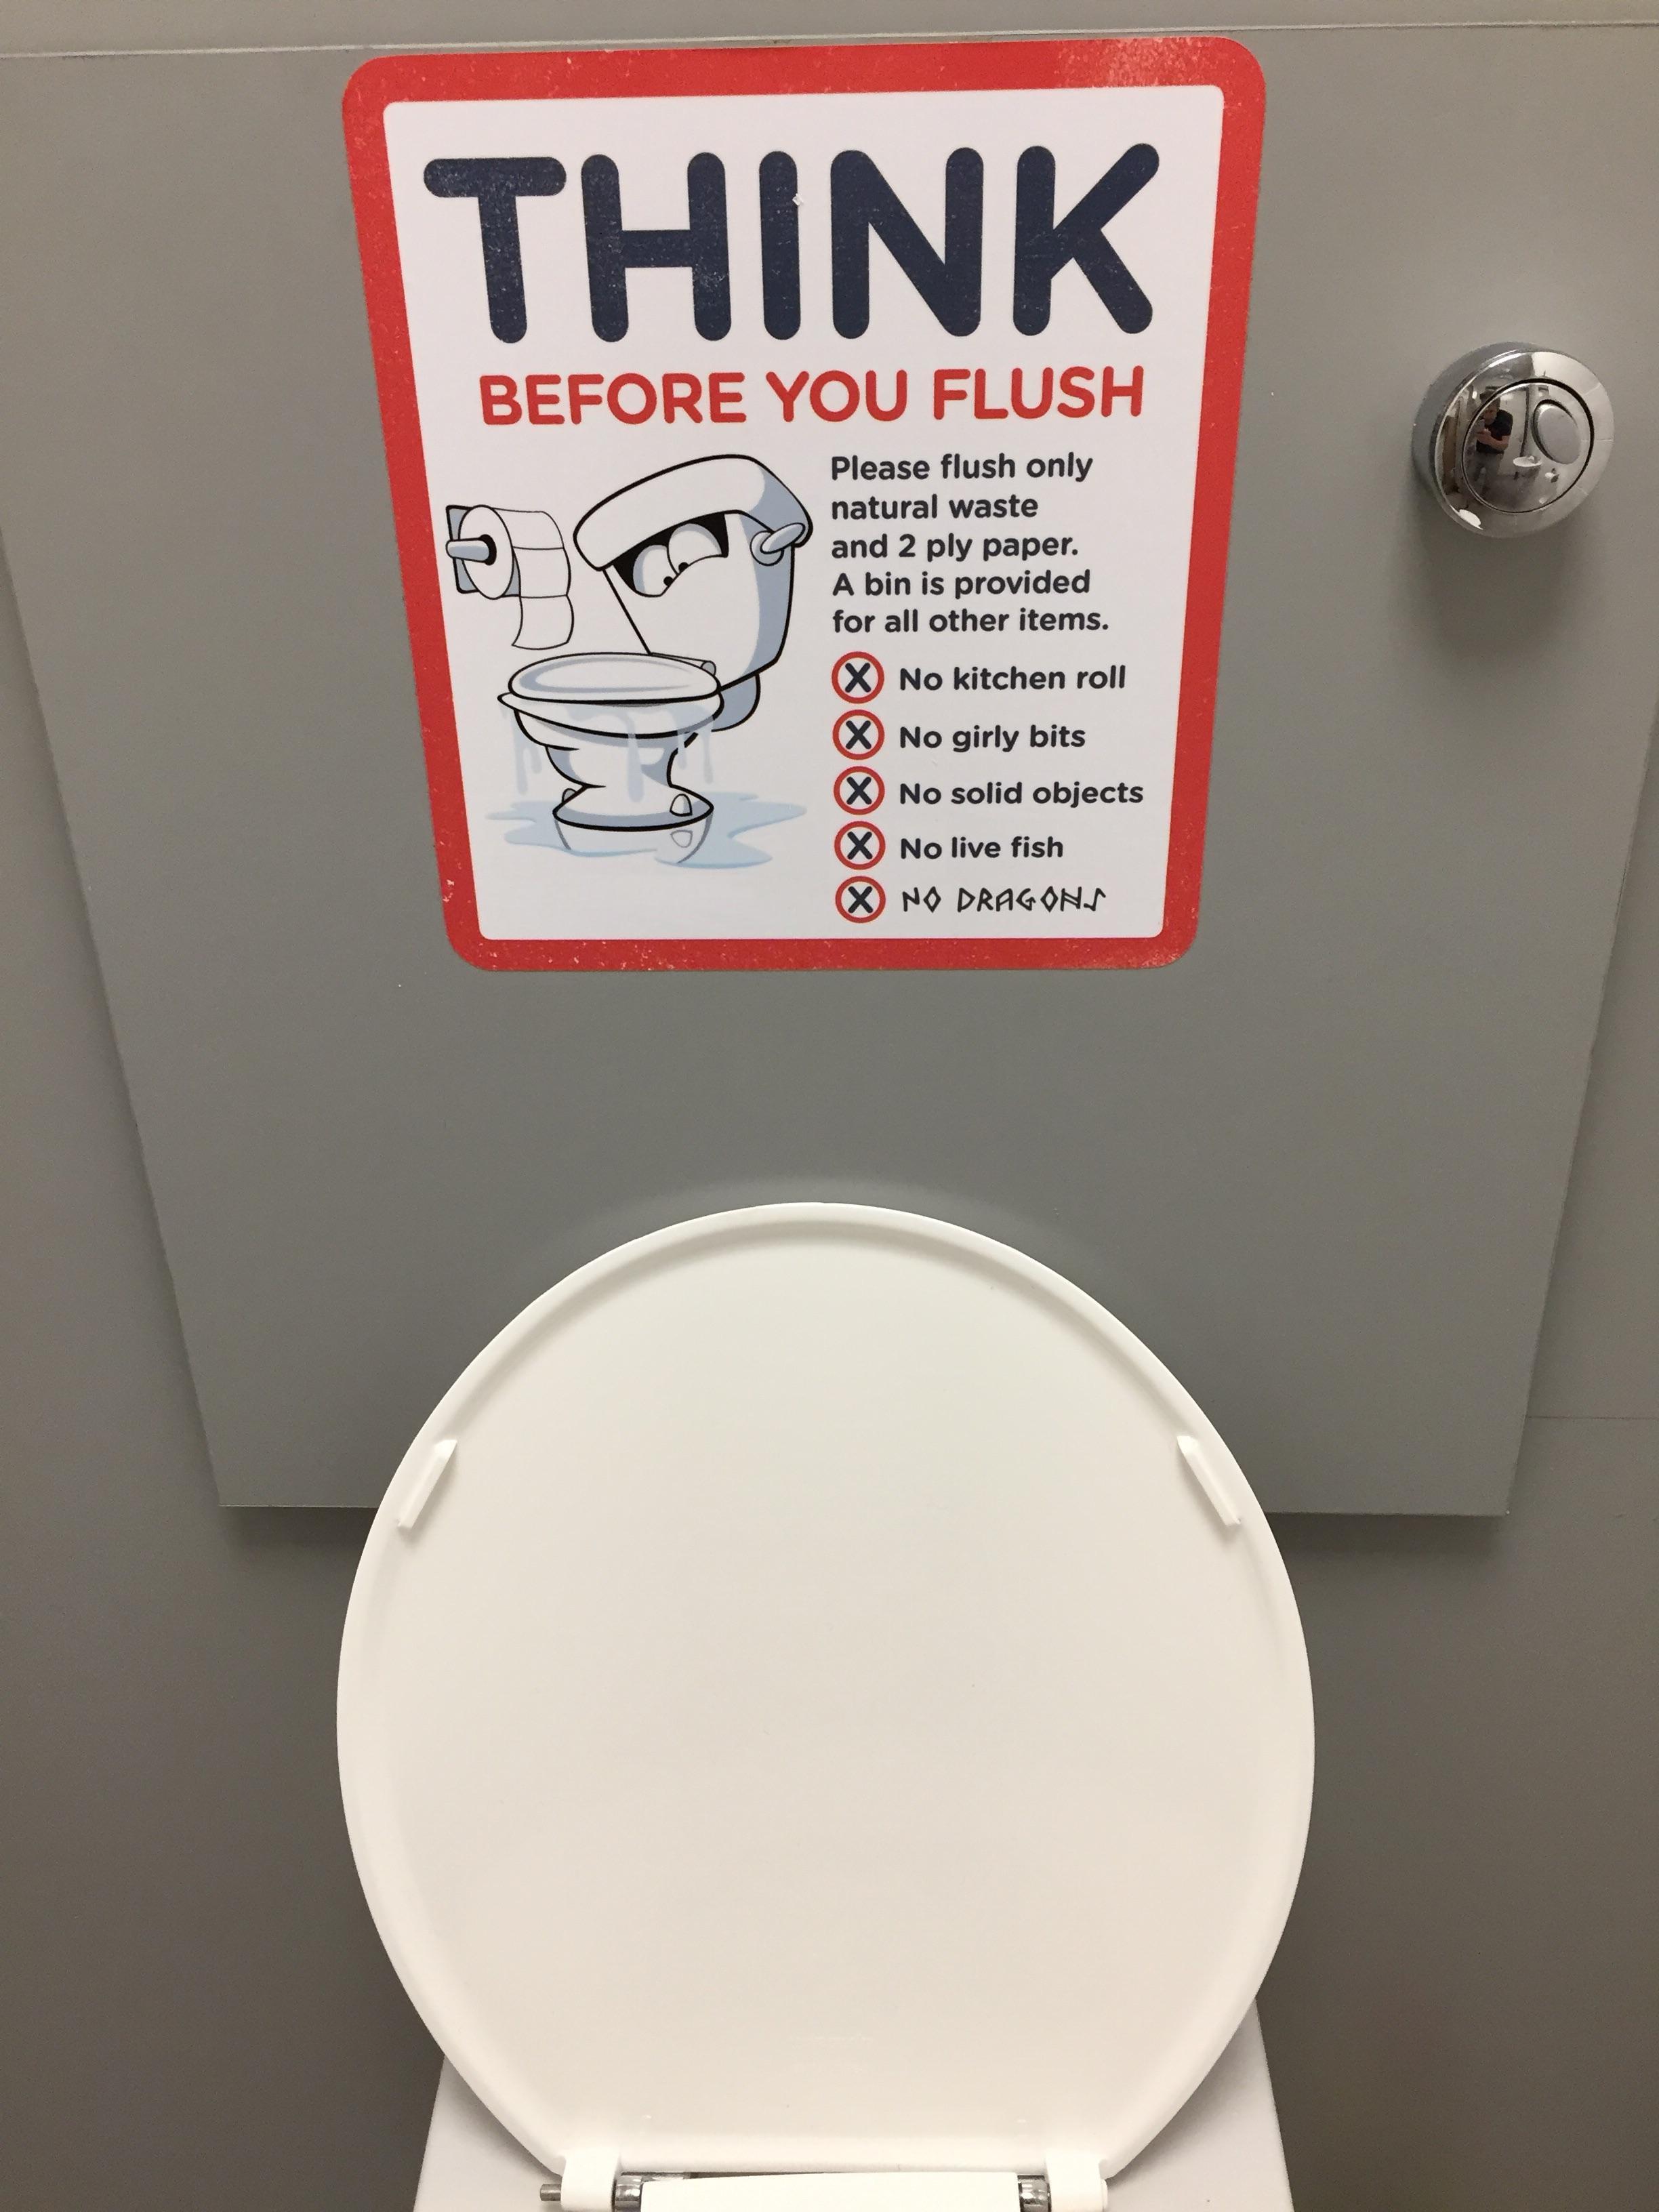 Sign above toilet, warning not to flush kitchen rolls, sanitary pads, solid objects, live fish and dragons.